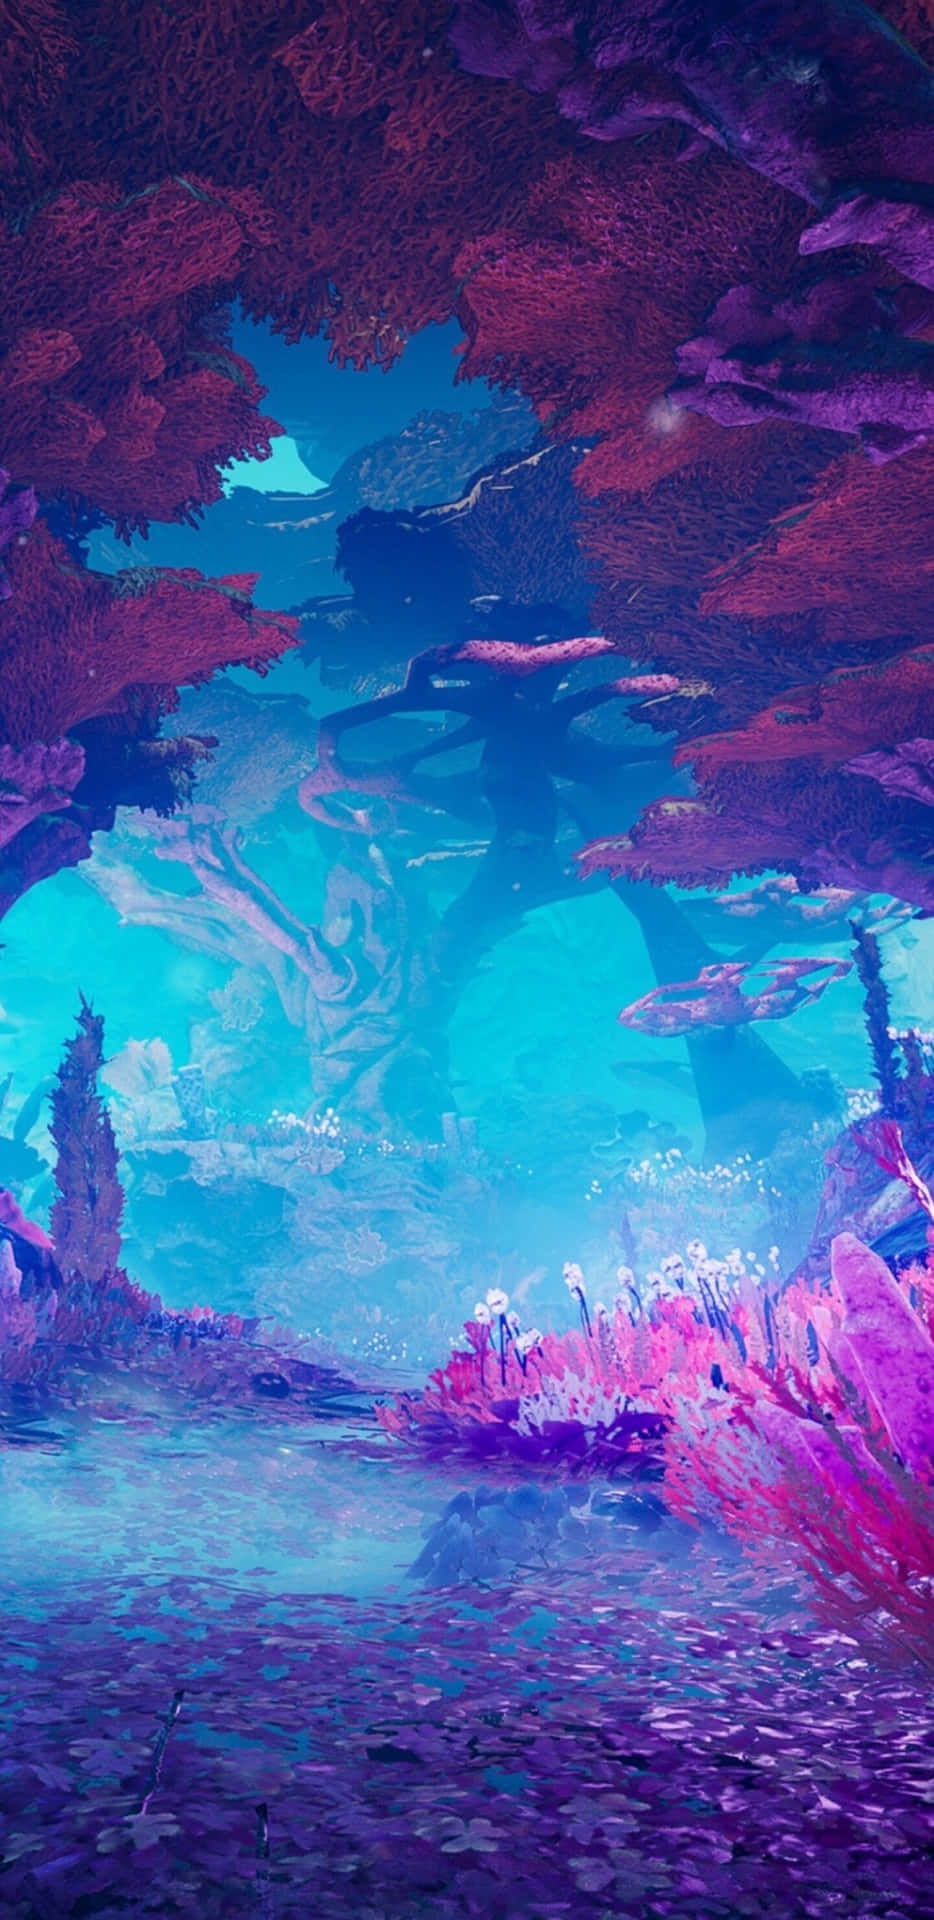 A Purple And Blue Landscape With A Lot Of Water